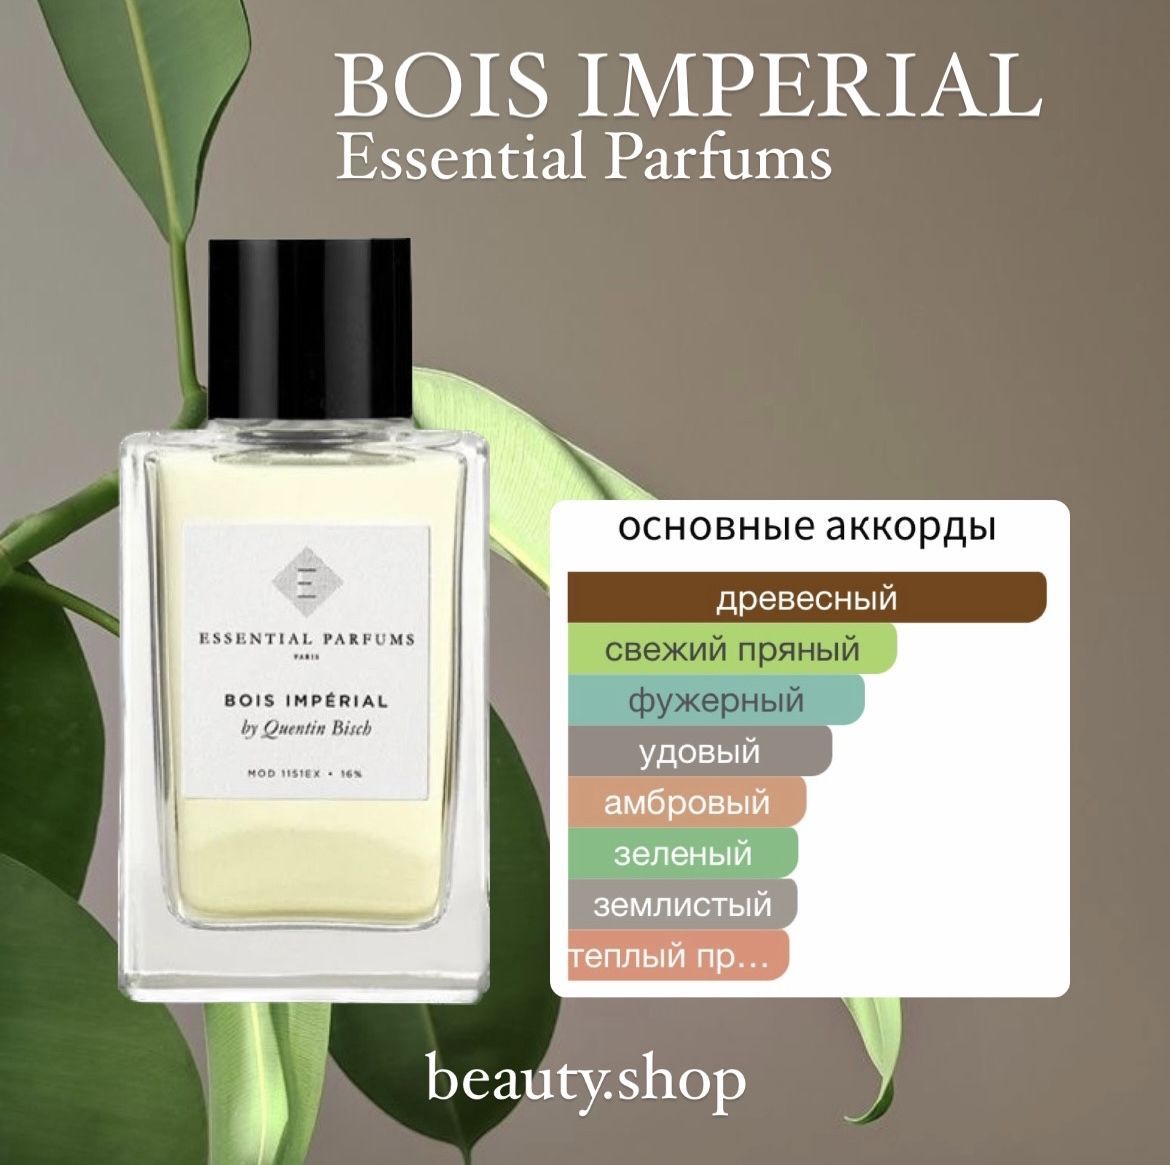 Essential parfums bois imperial оригинал. Эссеншиал Парфюм бойс Империал. Духи бойс Империал. Буа Империал Парфюм. Эссеншиал Парфамс Буа Империал.